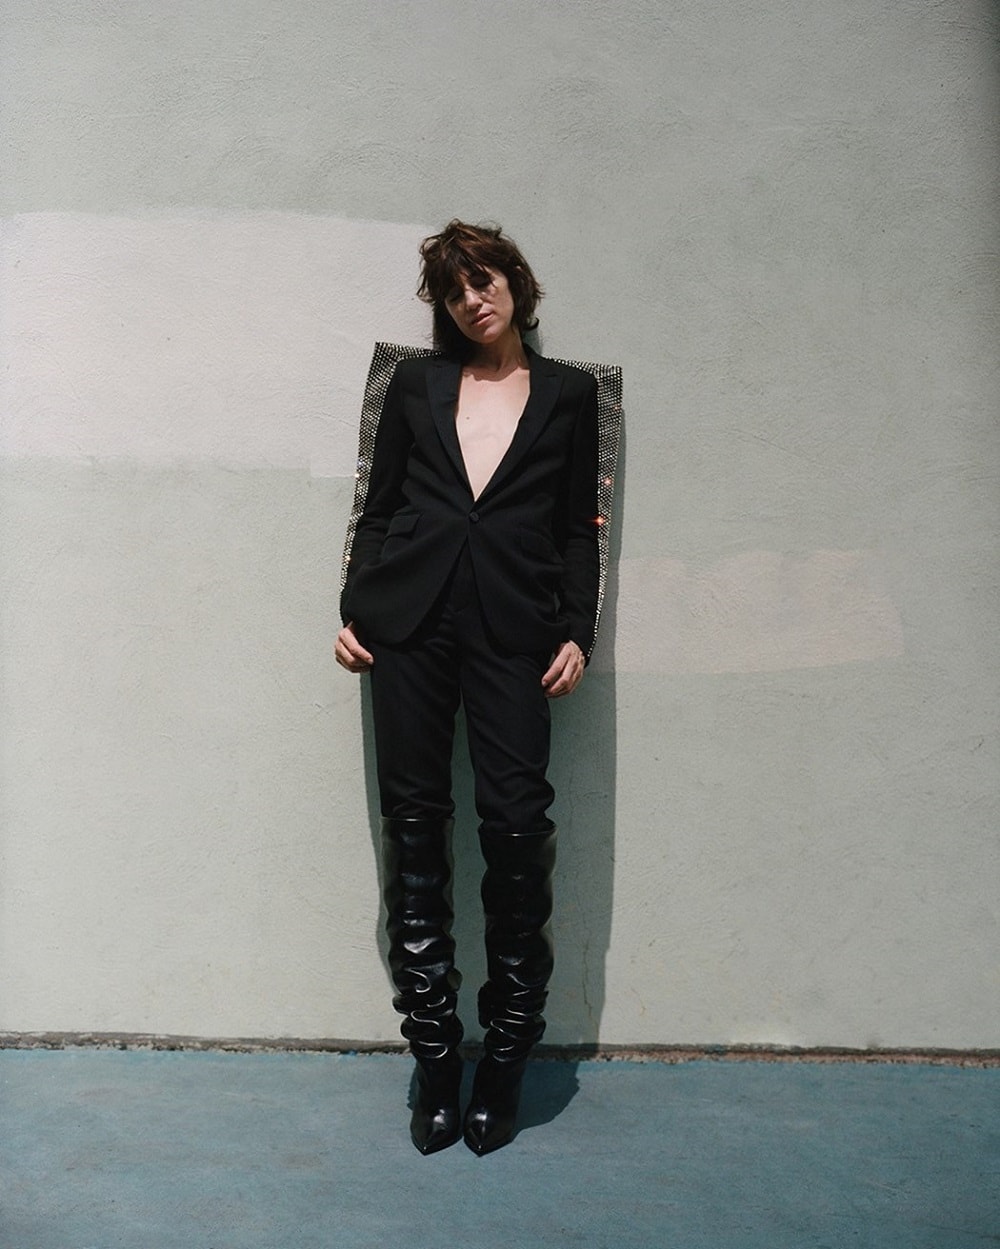 Charlotte Gainsbourg by Stef Mitchell for Dazed Magazine Fall-Winter 2017